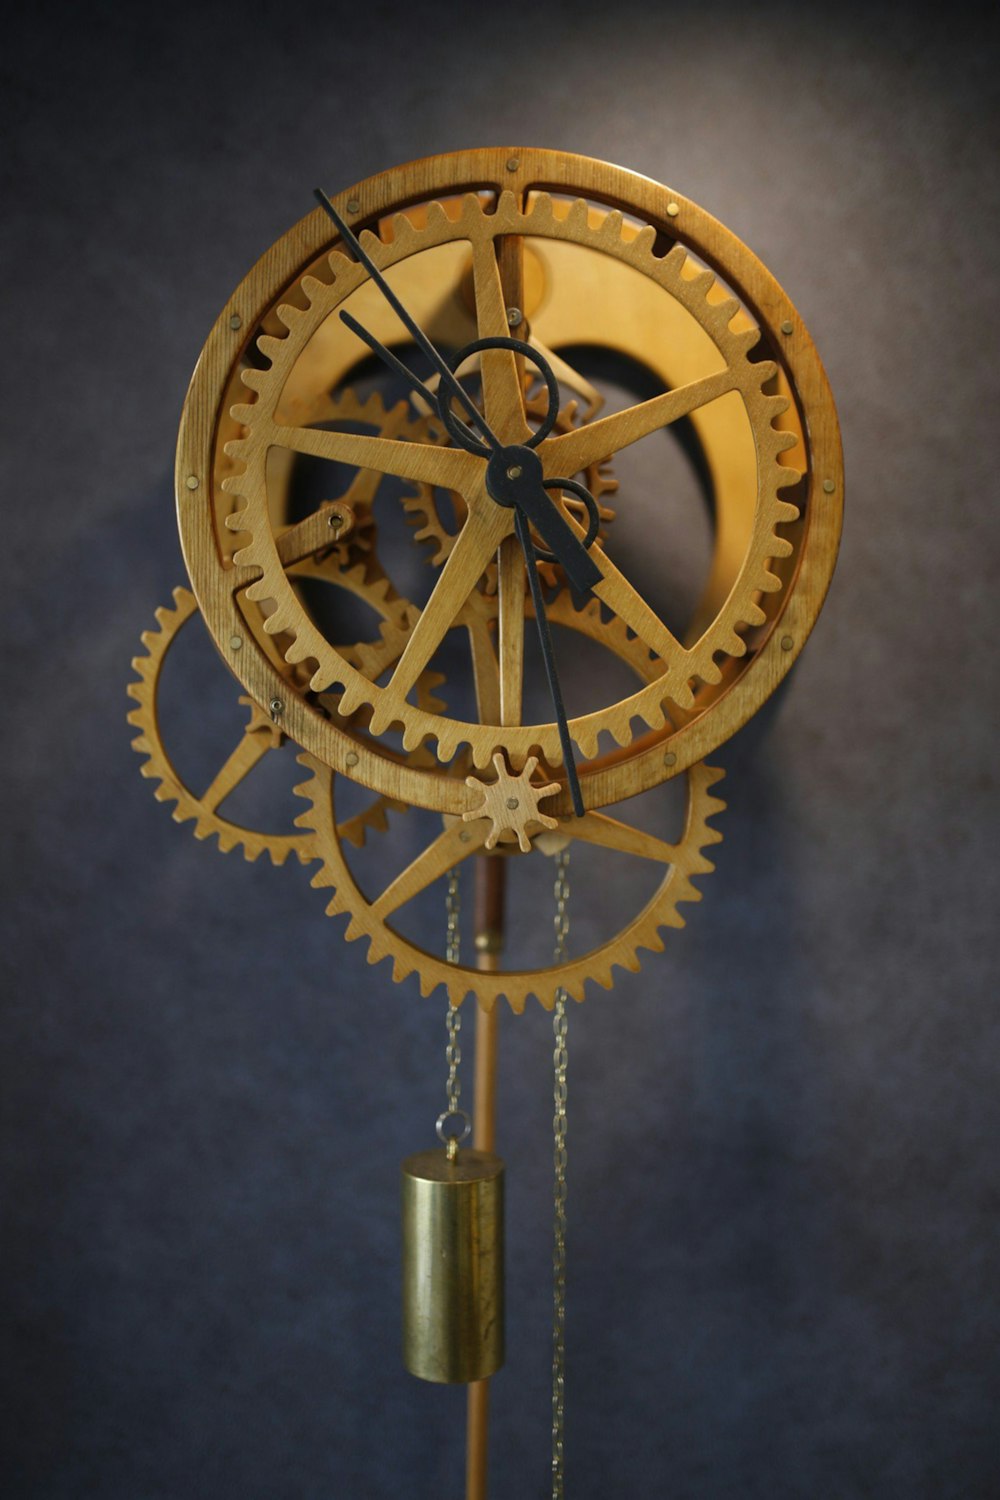 a golden clock with a chain attached to it